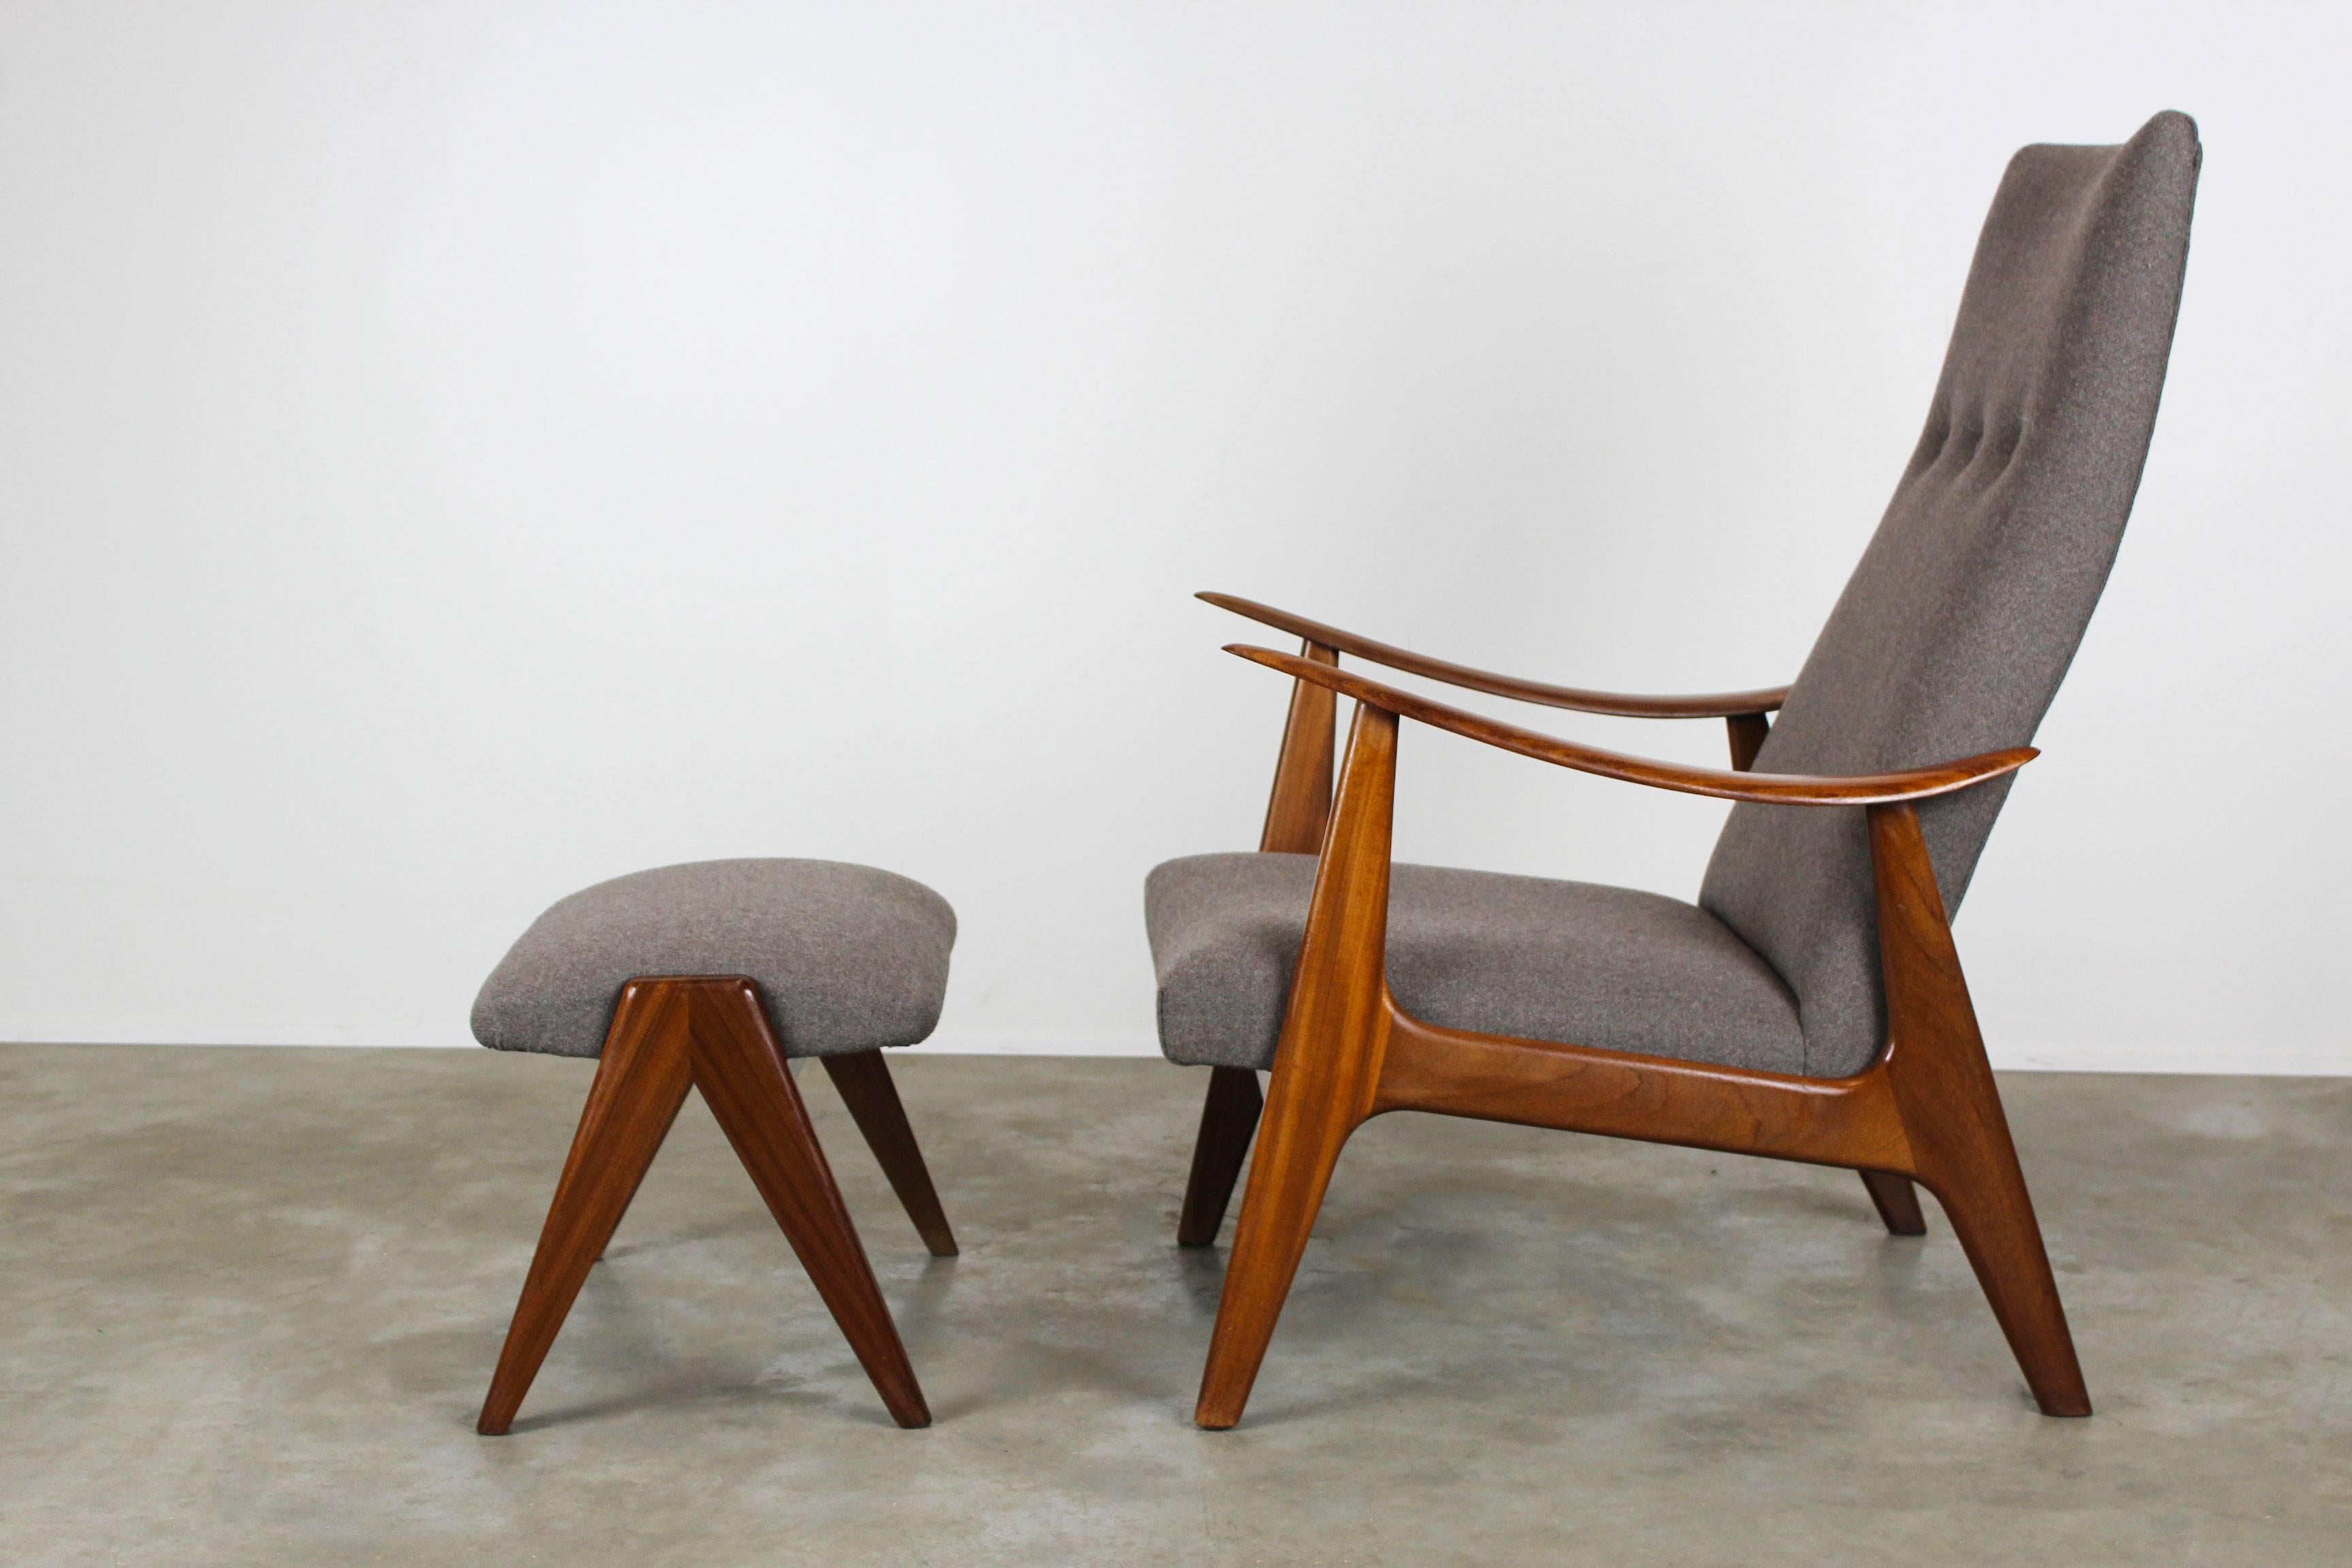 Fabric Louis Van Teeffelen Lounge Chair and Ottoman for Webe, 1960, Grey and Brown